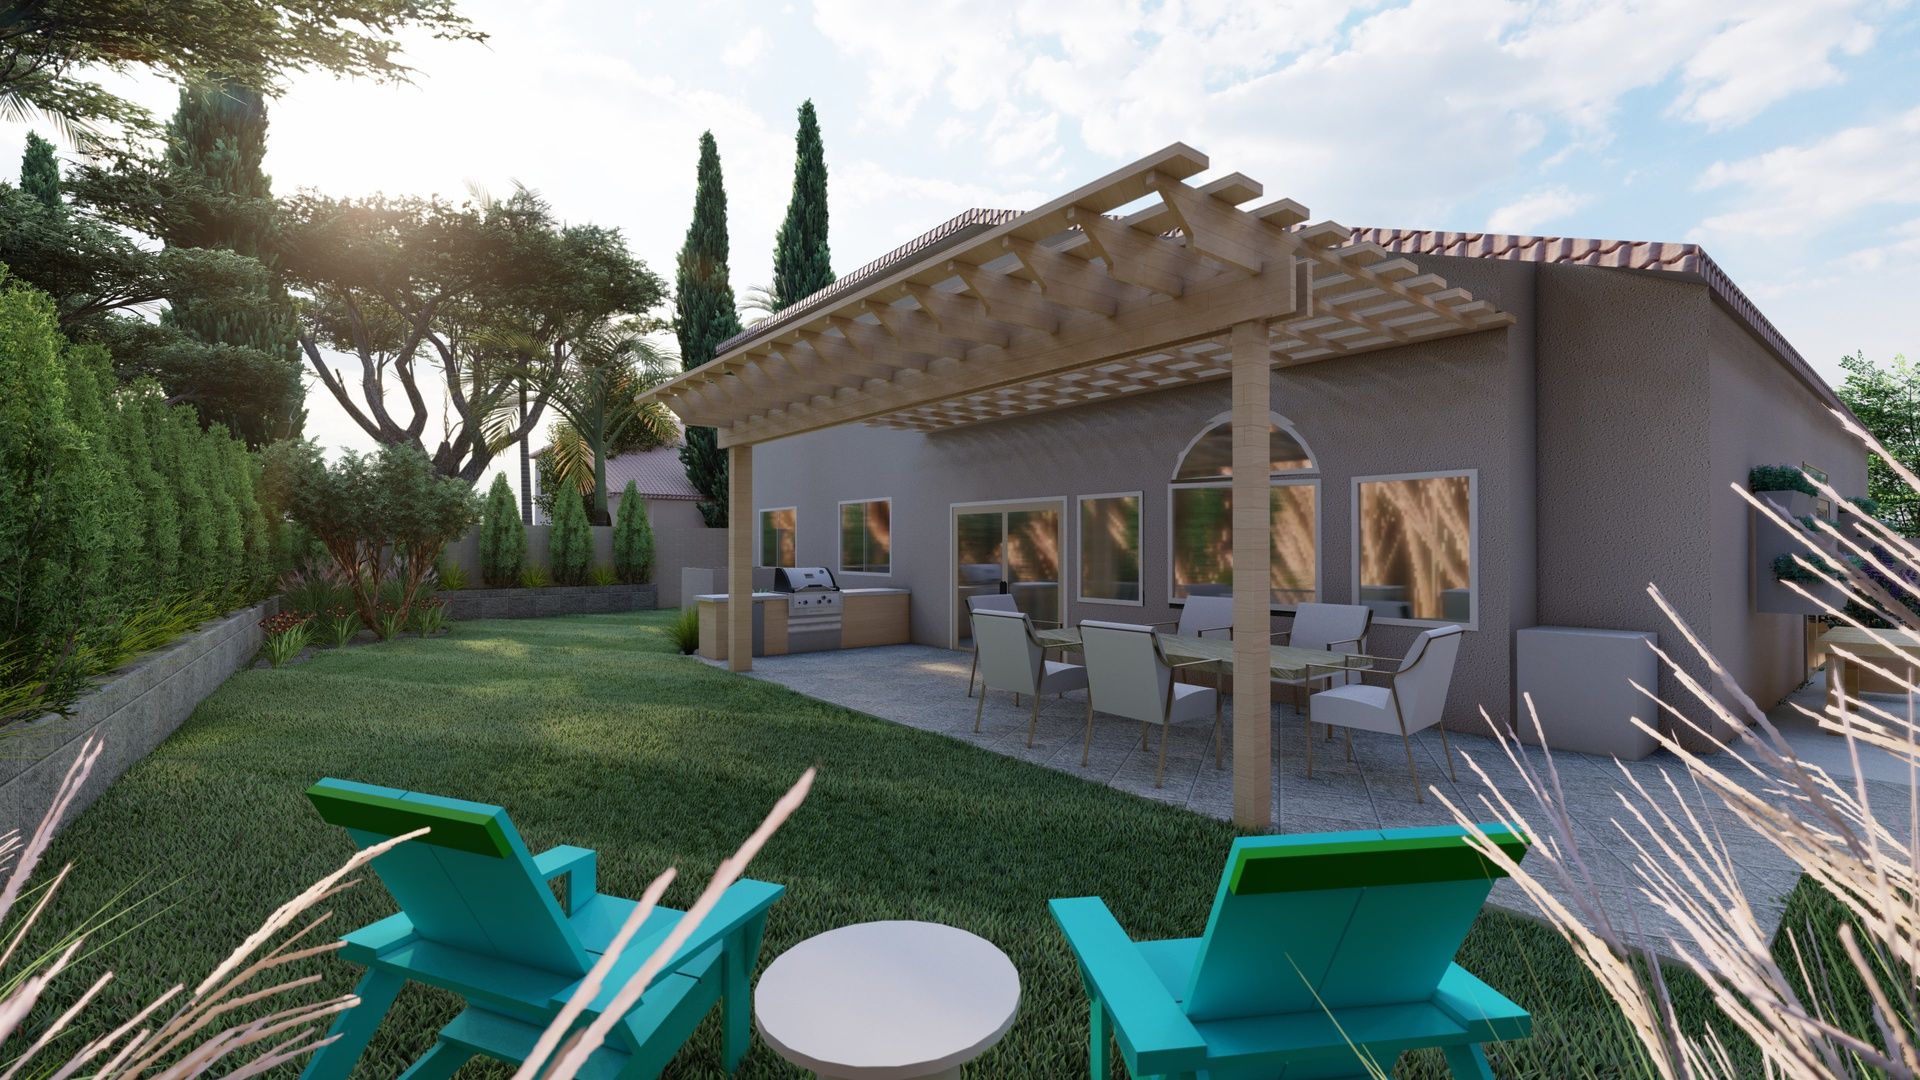 a pergola over a stone patio outdoor dining area with privacy trees along a backyard fence